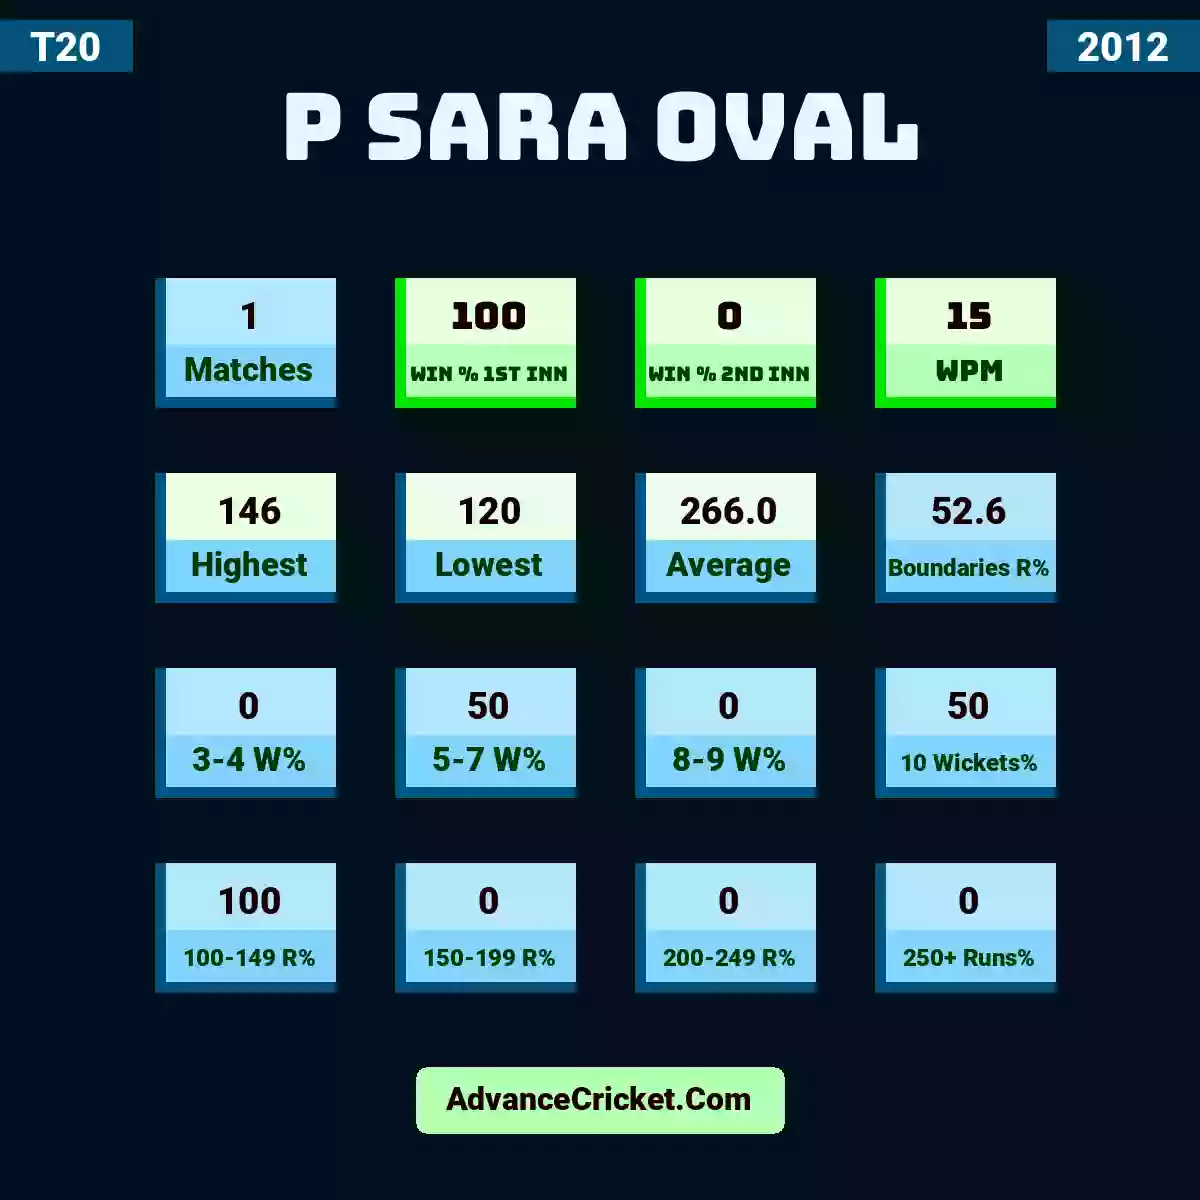 Image showing P Sara Oval with Matches: 1, Win % 1st Inn: 100, Win % 2nd Inn: 0, WPM: 15, Highest: 146, Lowest: 120, Average: 266.0, Boundaries R%: 52.6, 3-4 W%: 0, 5-7 W%: 50, 8-9 W%: 0, 10 Wickets%: 50, 100-149 R%: 100, 150-199 R%: 0, 200-249 R%: 0, 250+ Runs%: 0.